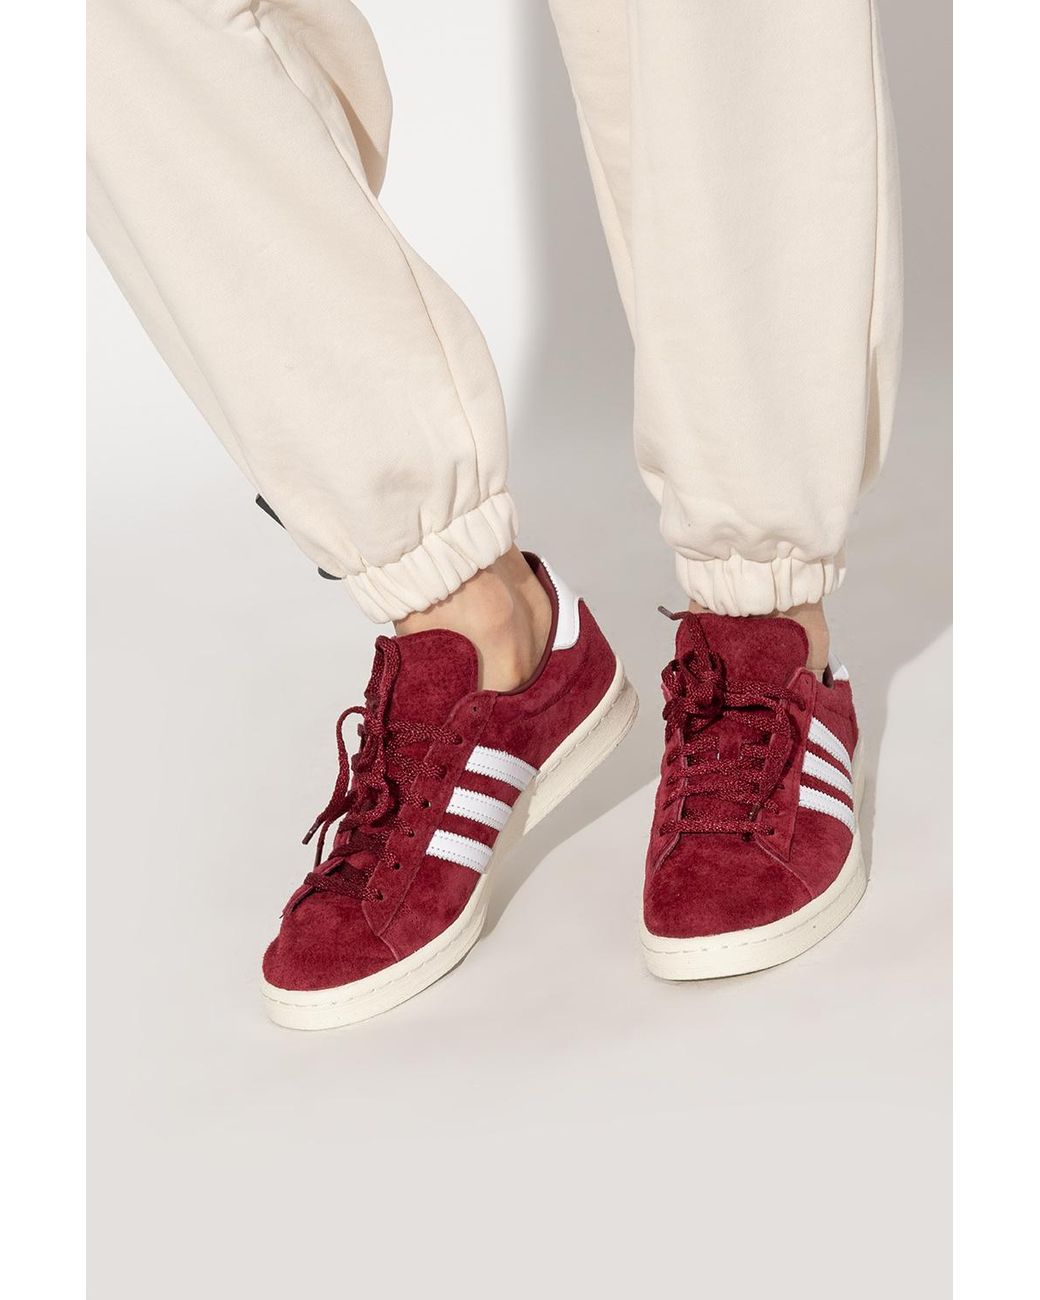 adidas Originals Leather 'campus 80' Sneakers in Red | Lyst